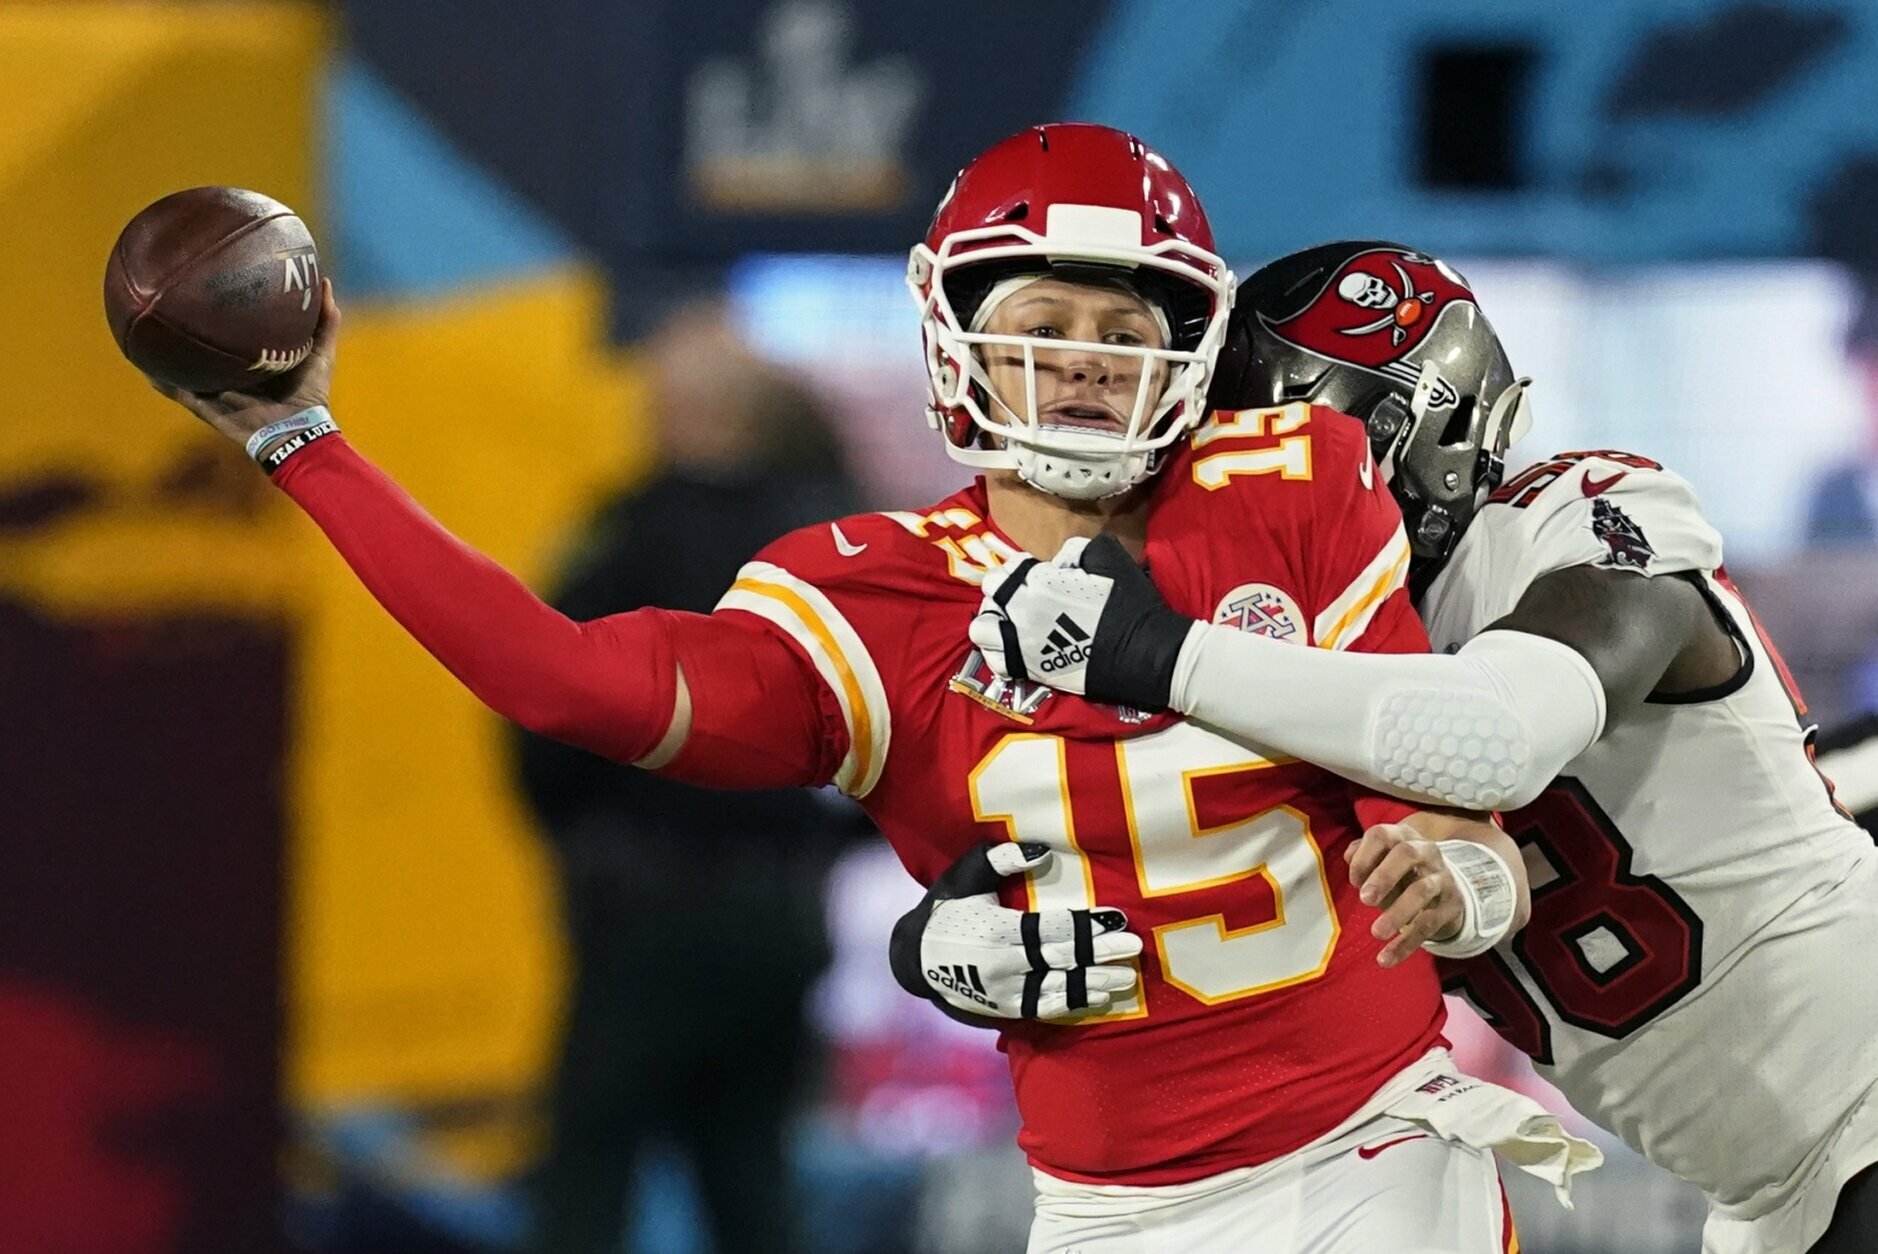 Kansas City Chiefs quarterback Patrick Mahomes passes under pressure from Tampa Bay Buccaneers outside linebacker Shaquil Barrett during the first half of the NFL Super Bowl 55 football game Sunday, Feb. 7, 2021, in Tampa, Fla. (AP Photo/Ashley Landis)